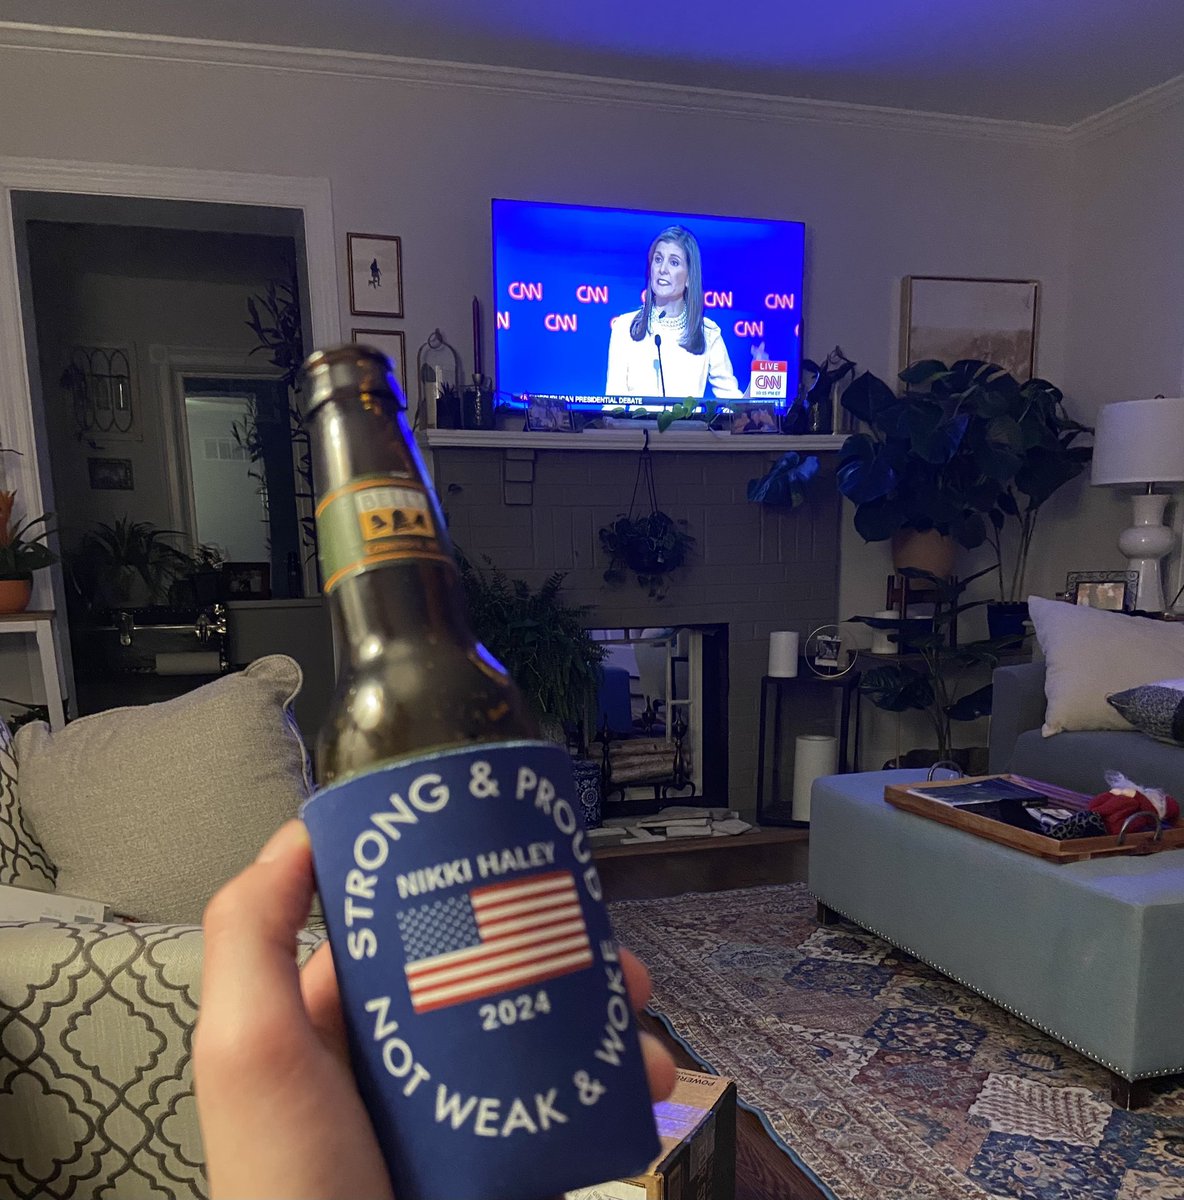 Michigan beer and @NikkiHaley for the win! Any questions? #StrongAndProud 💪 🍺